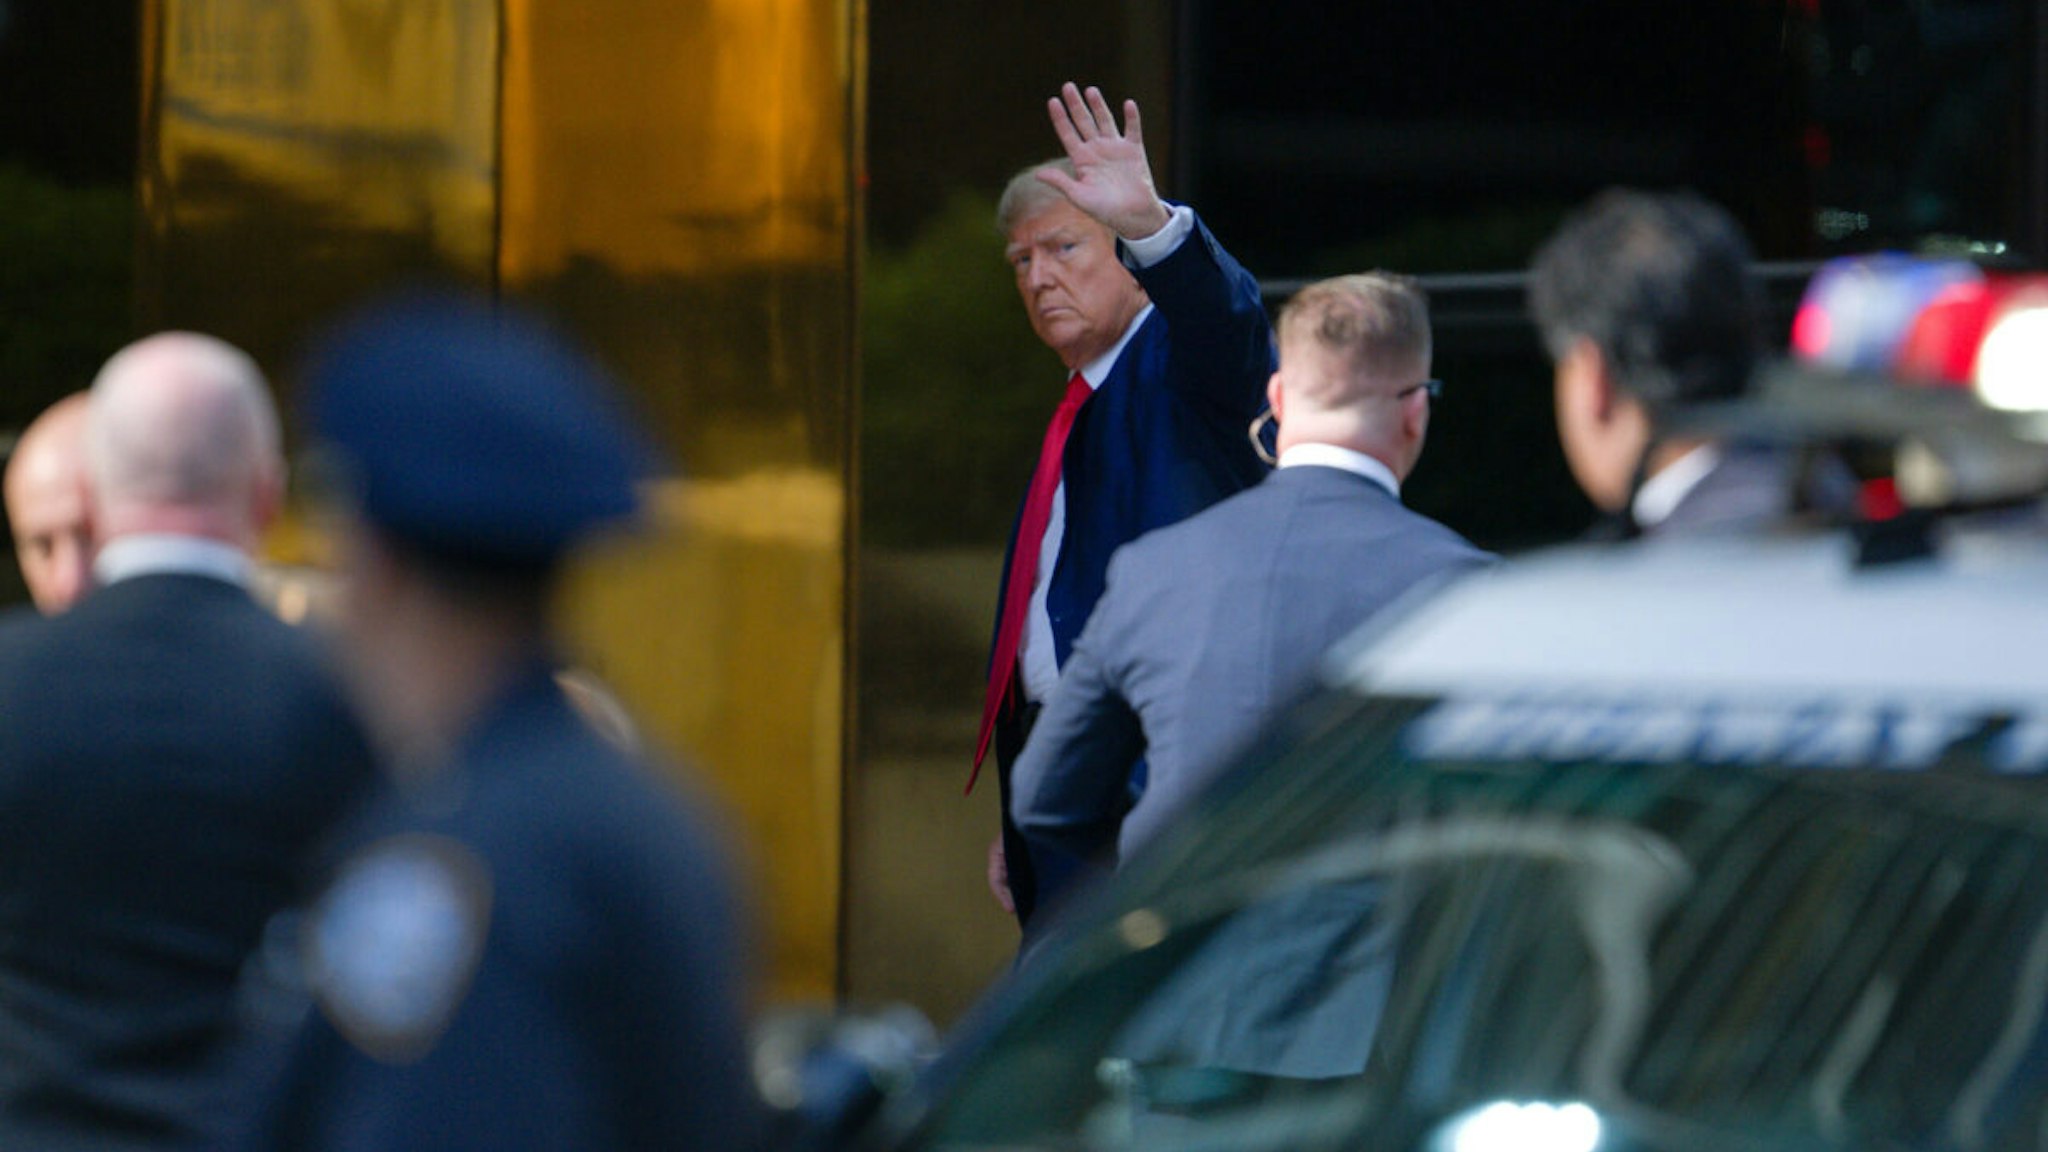 Former U.S. President Donald Trump arrives at Trump Tower in Manhattan on April 3, 2023 in New York City.